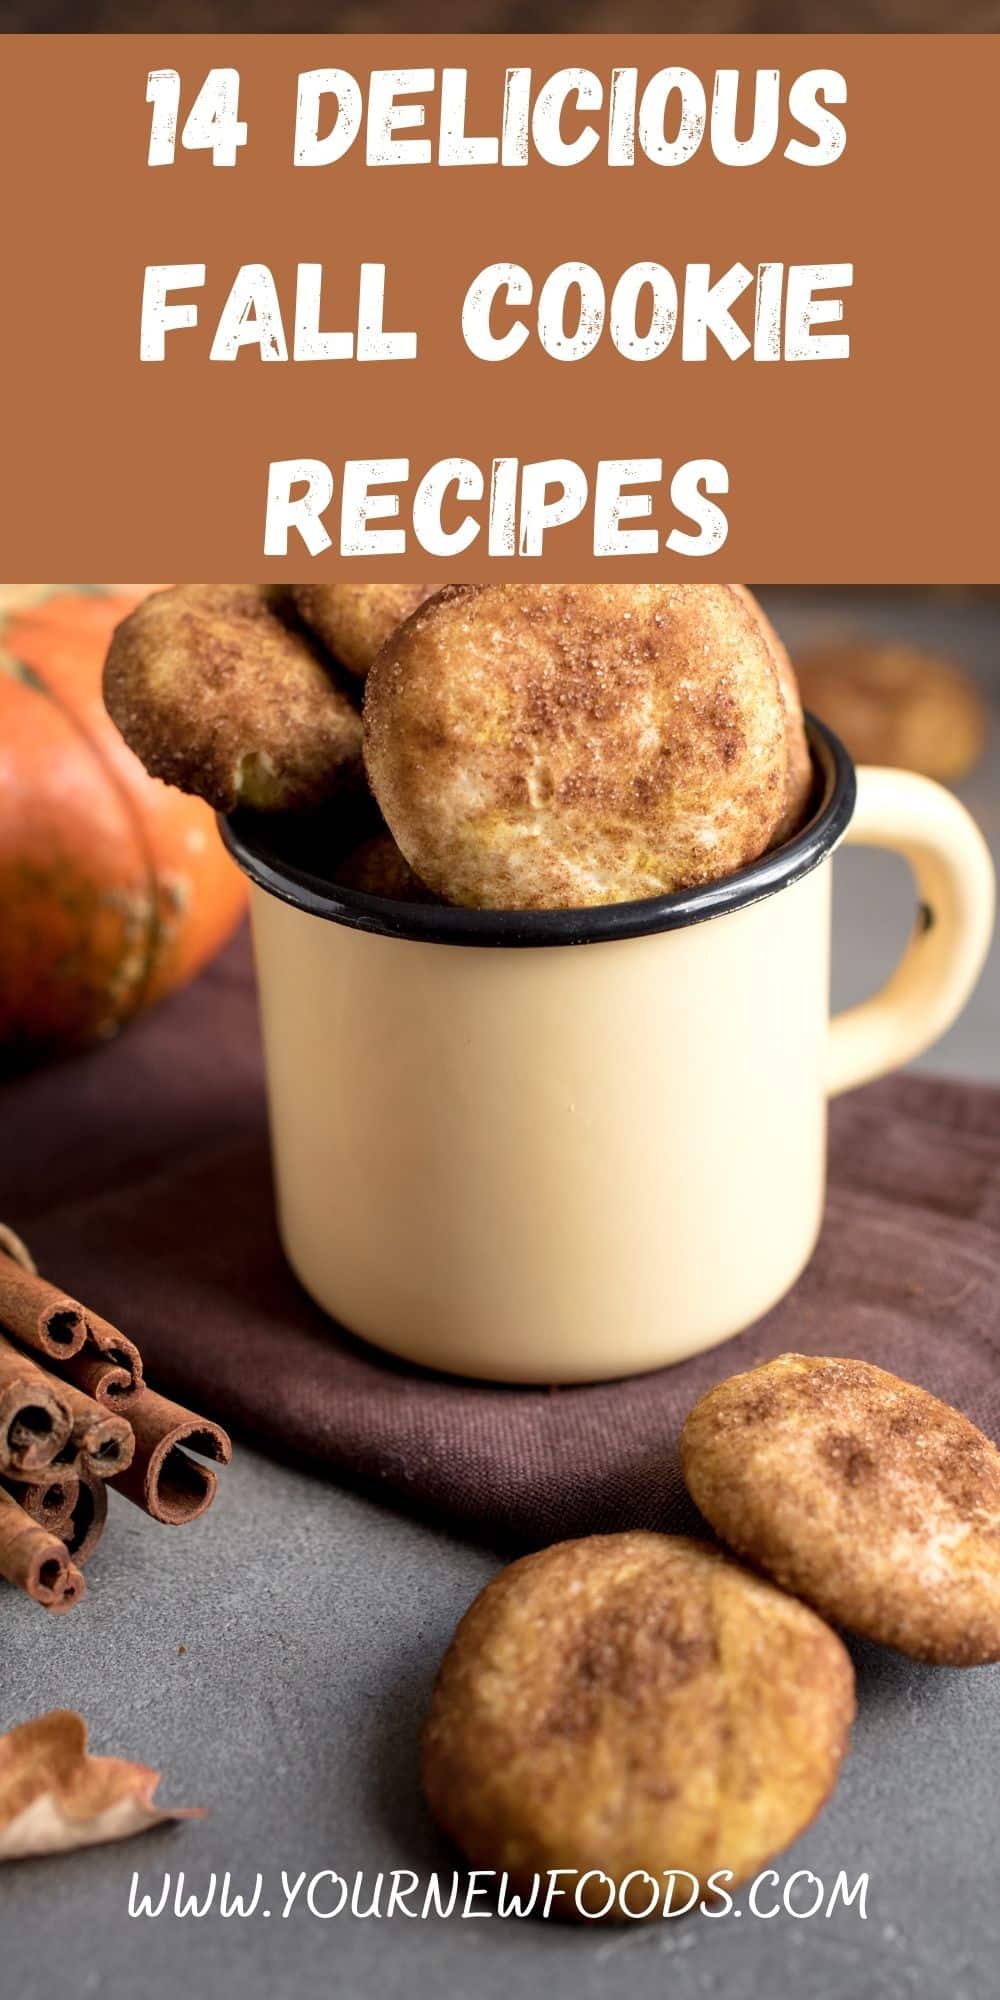 fall Snickerdoodle cookies in a white metal mug with a blue rim